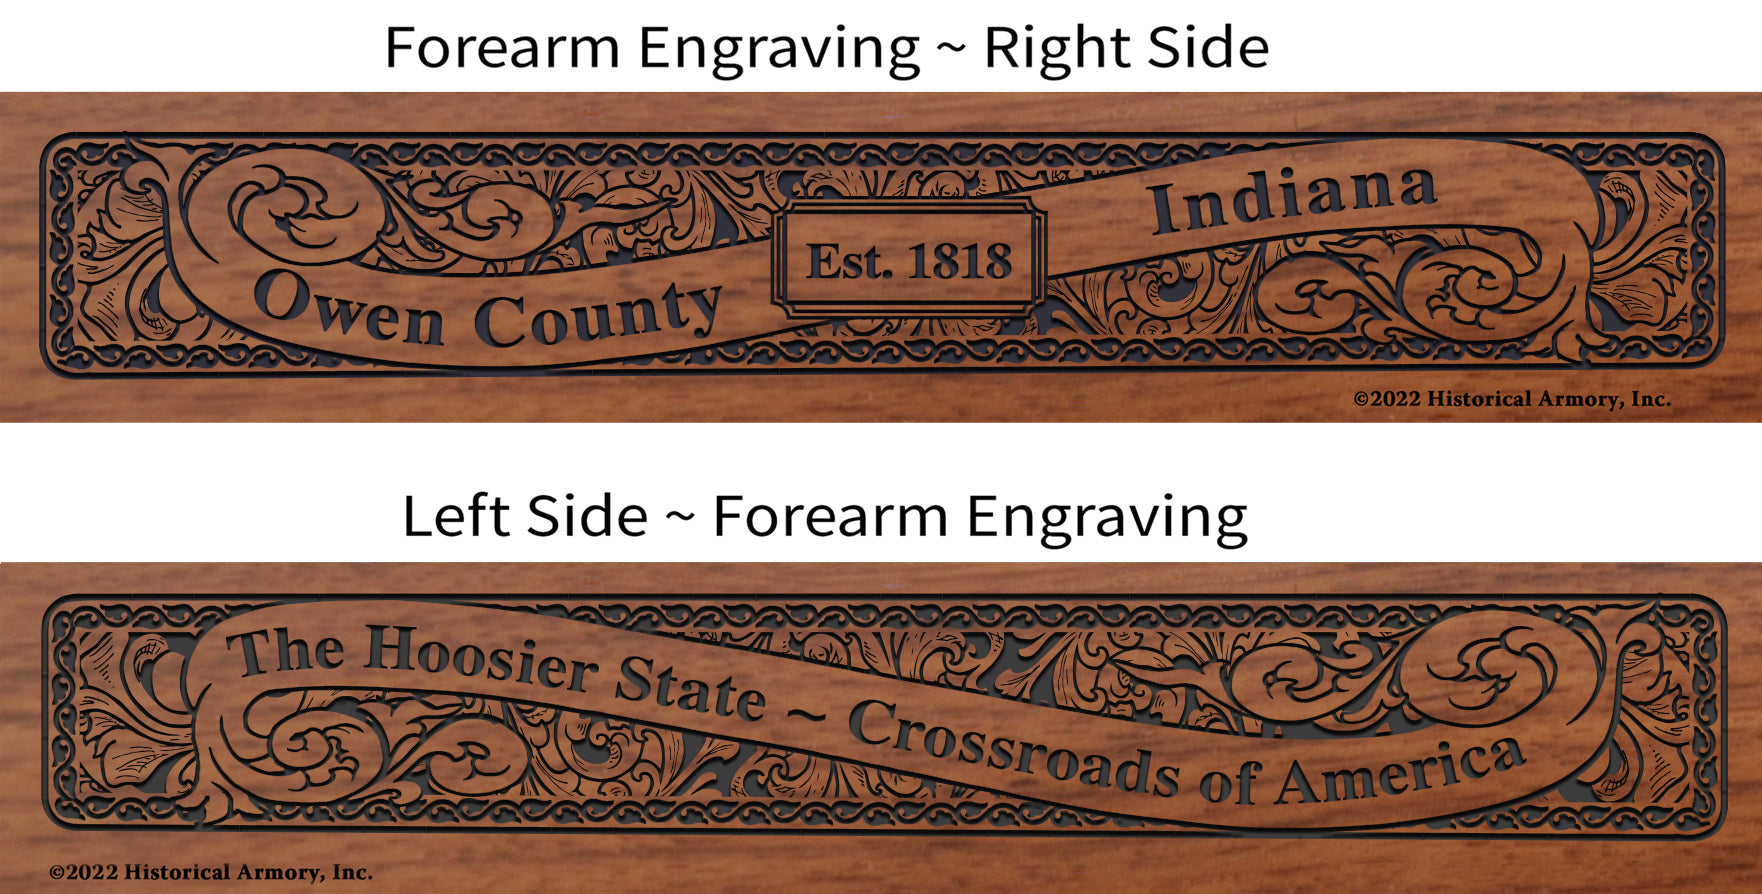 Owen County Indiana Engraved Rifle Forearm